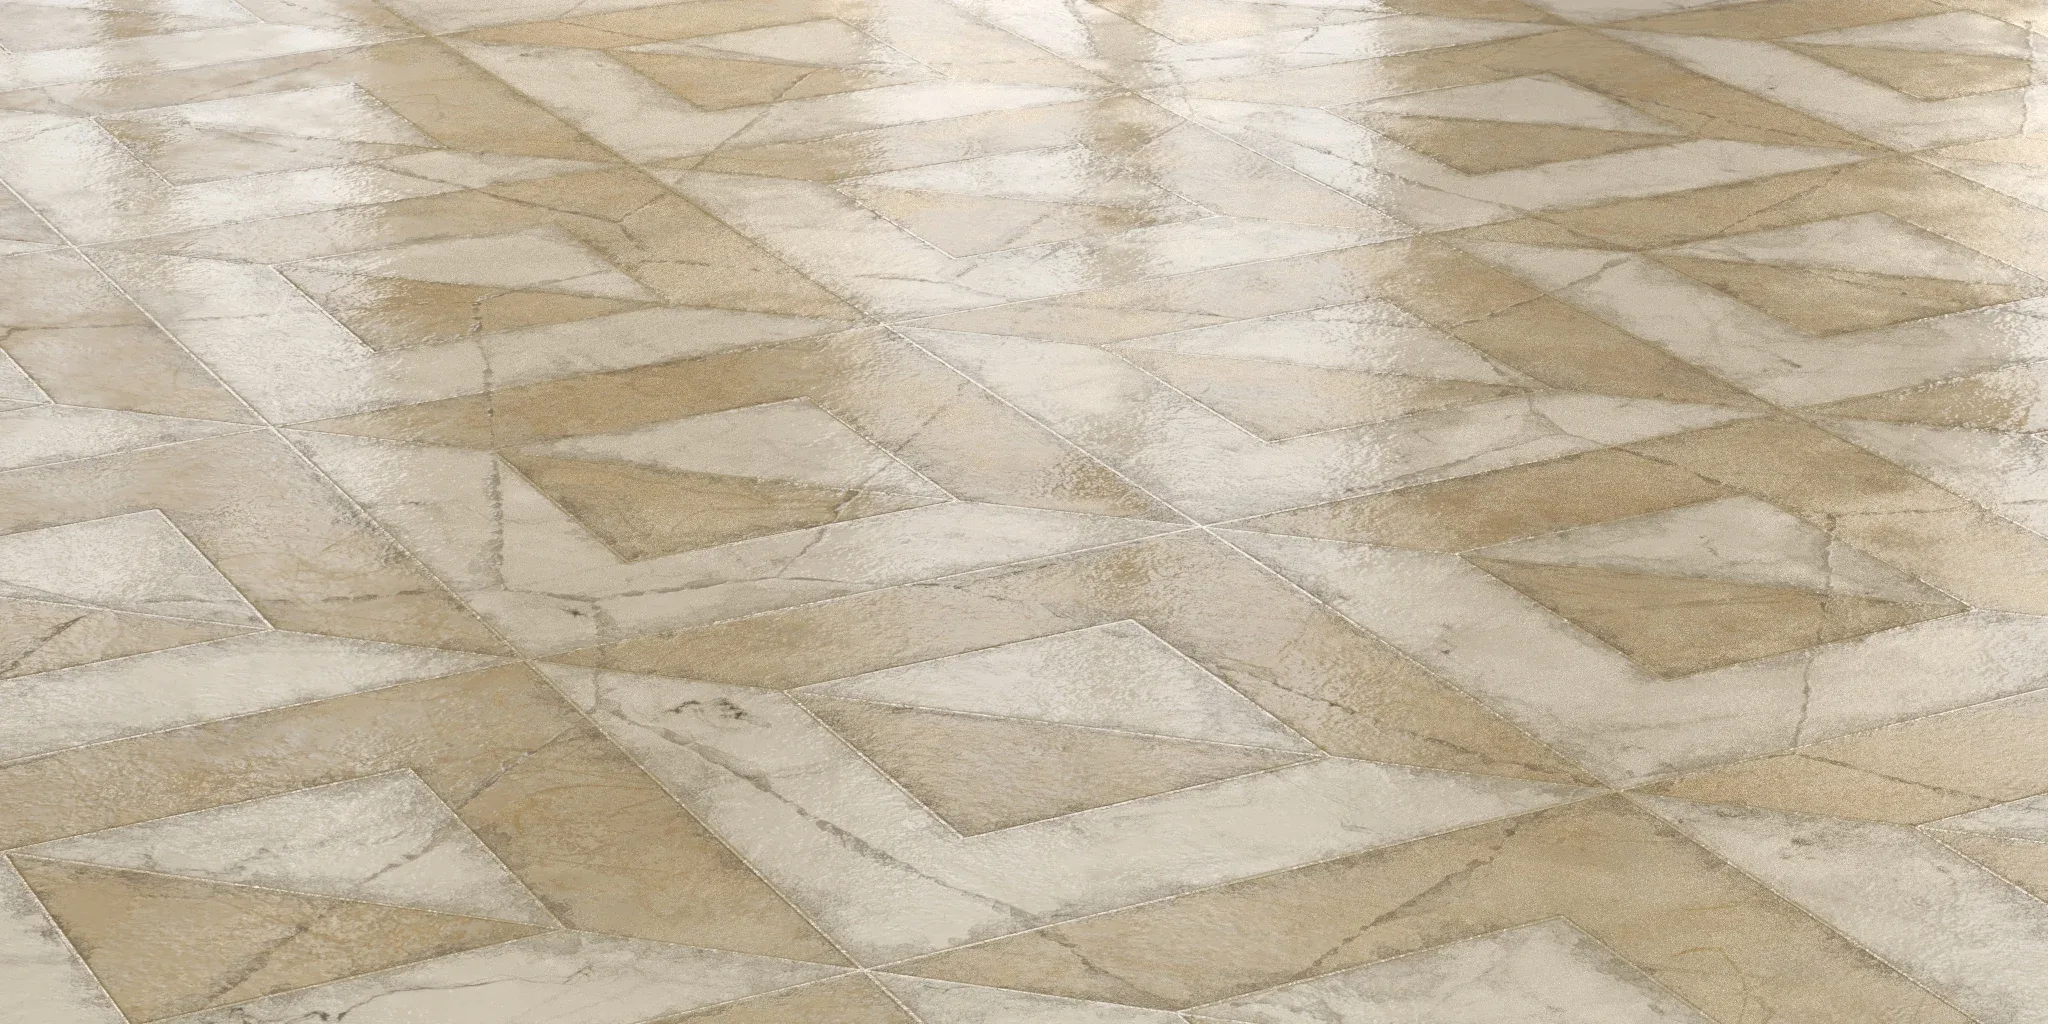 Tiled Marble - Variable